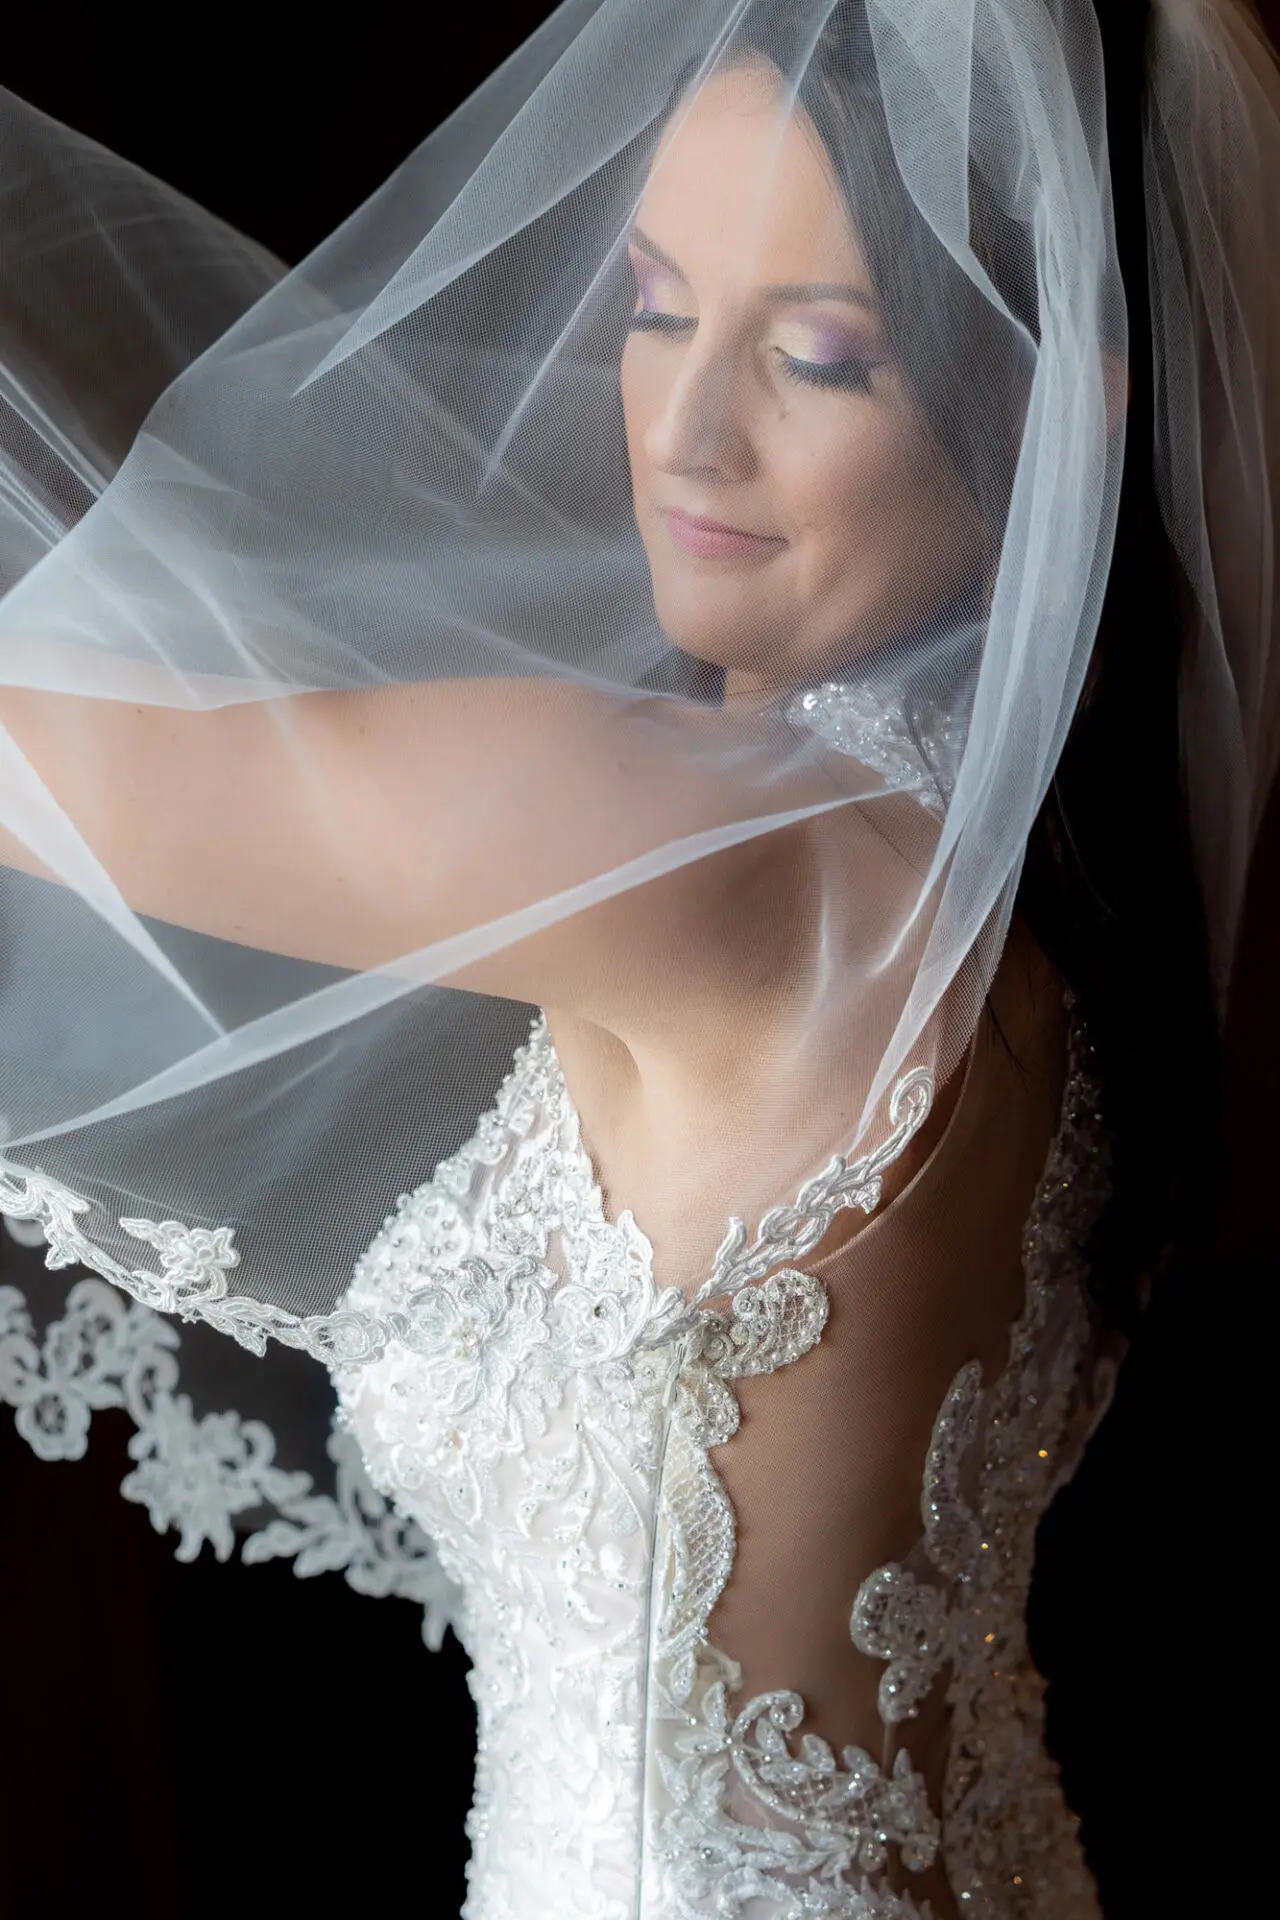 Close-up photo of the bride